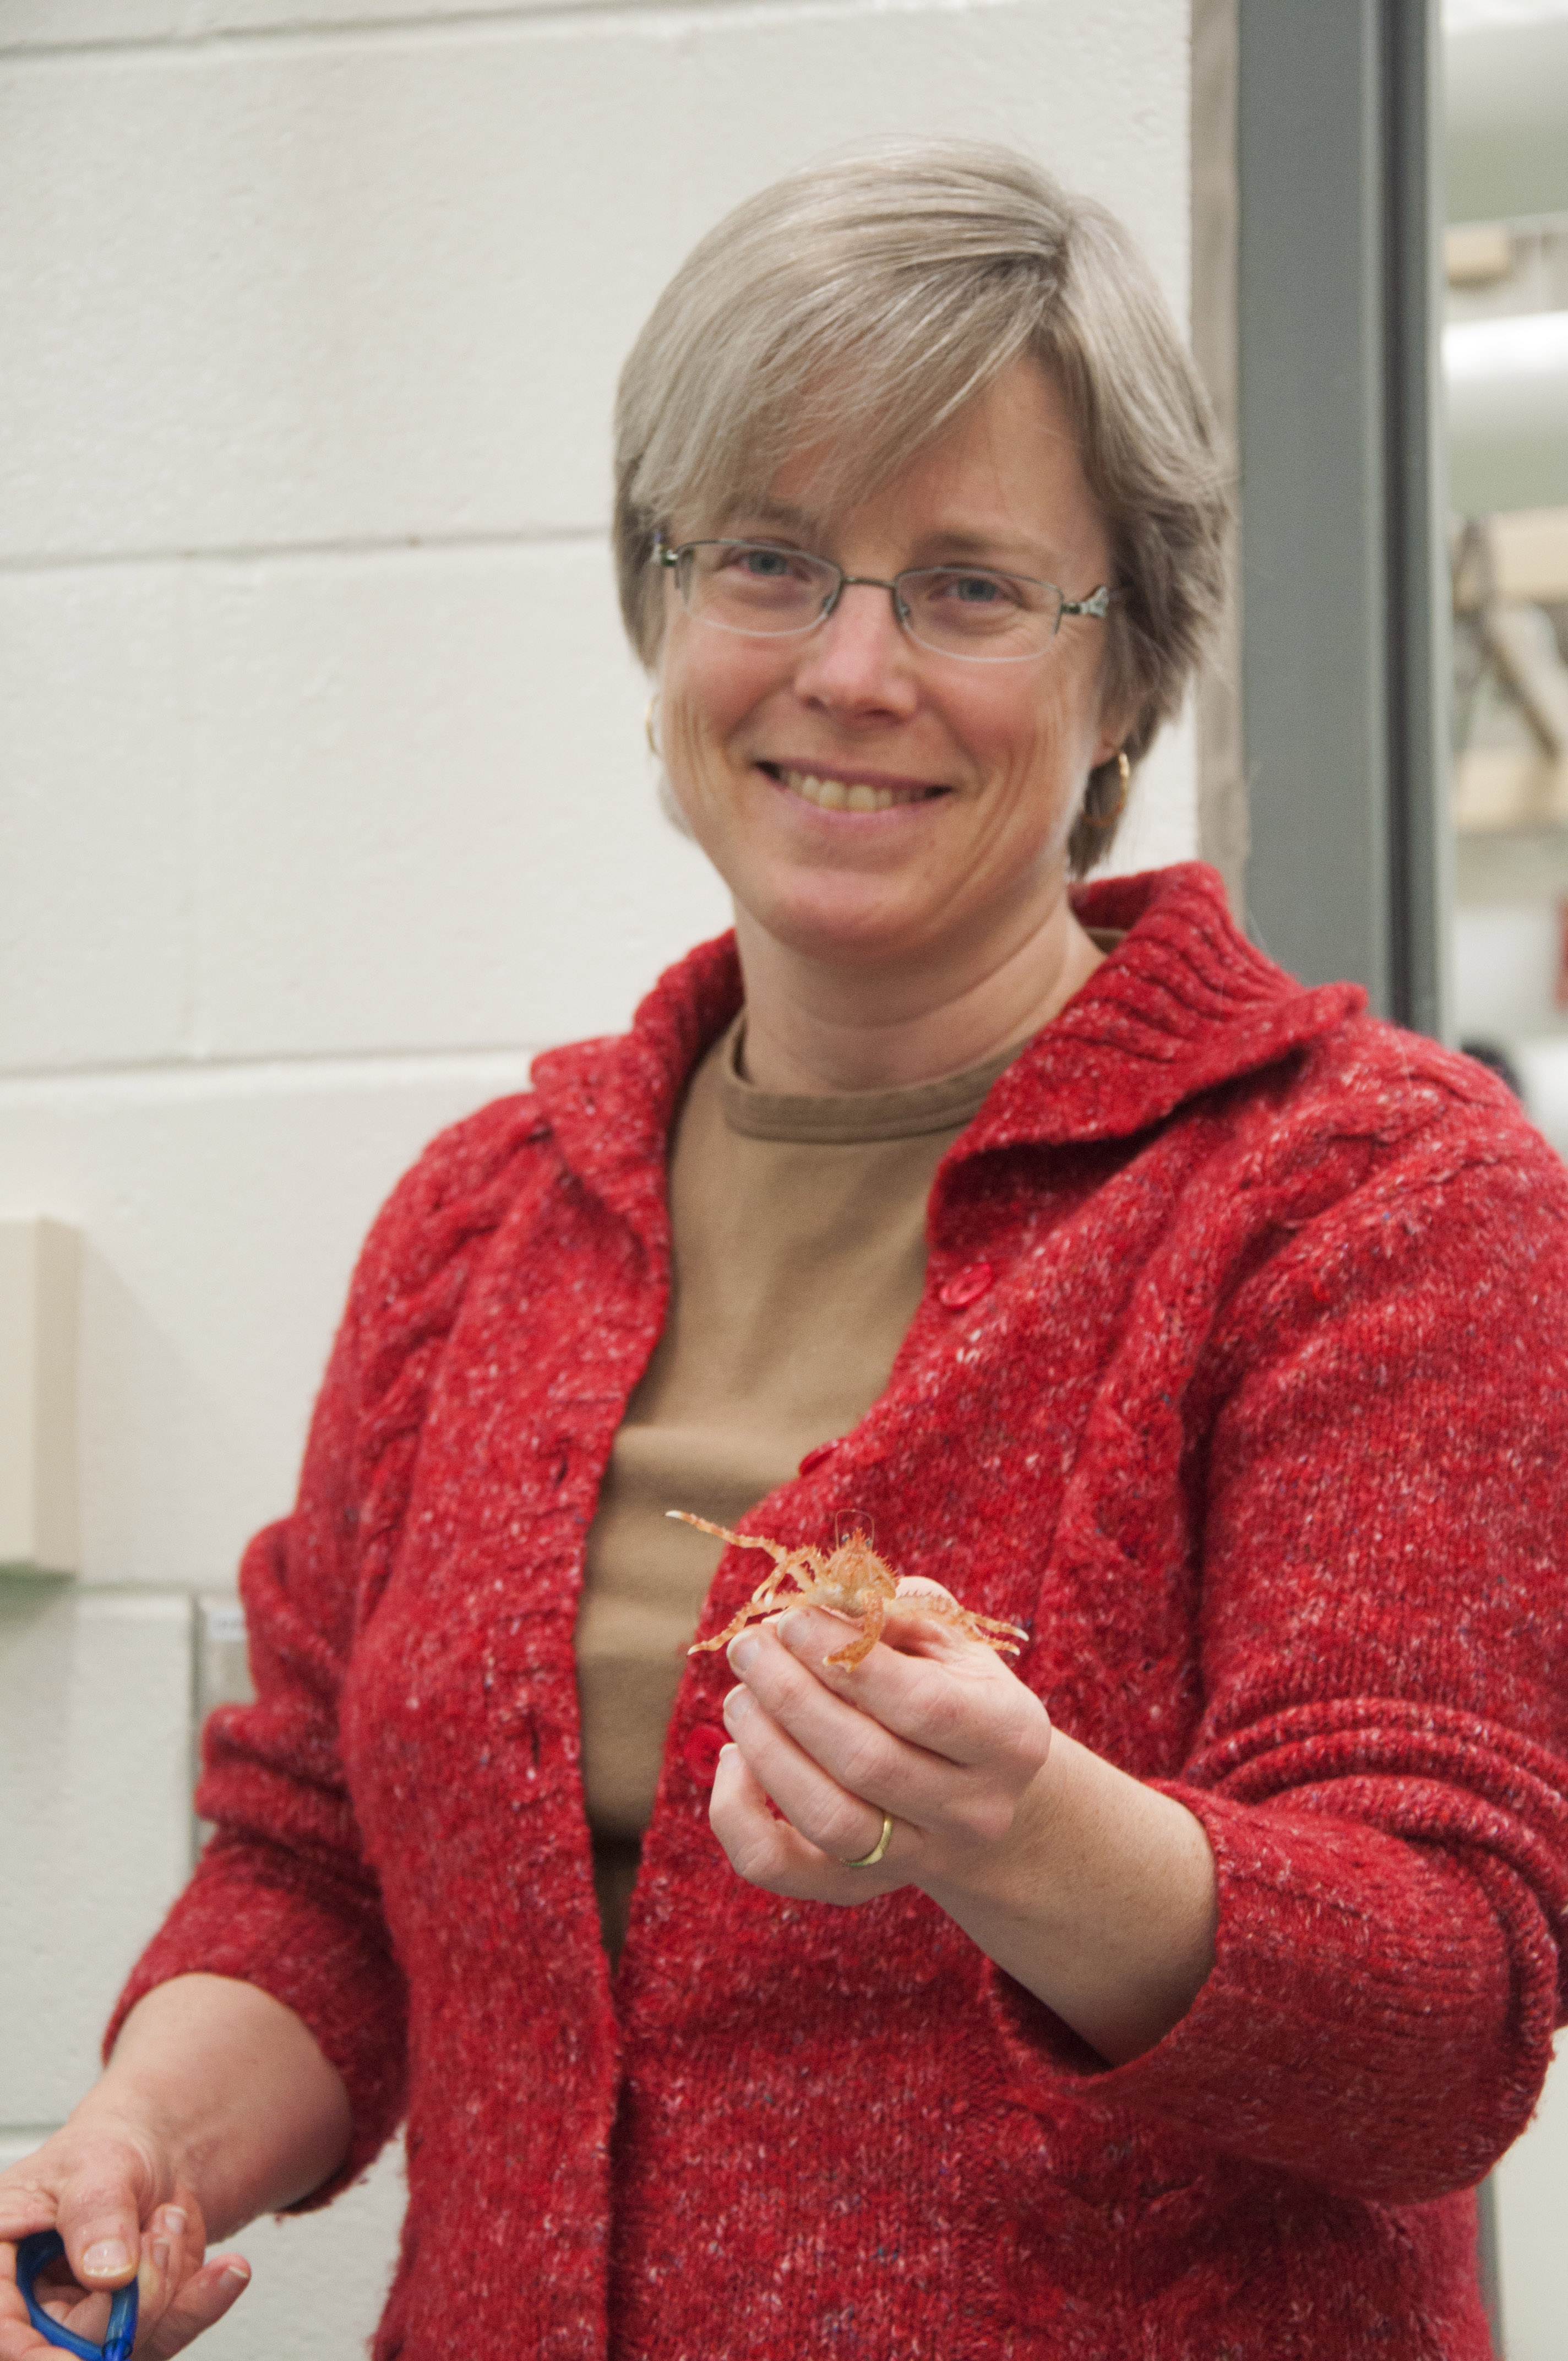 UAF marine biologist Ginny Eckert displays one of her research subjects, a juvenile red king crab.